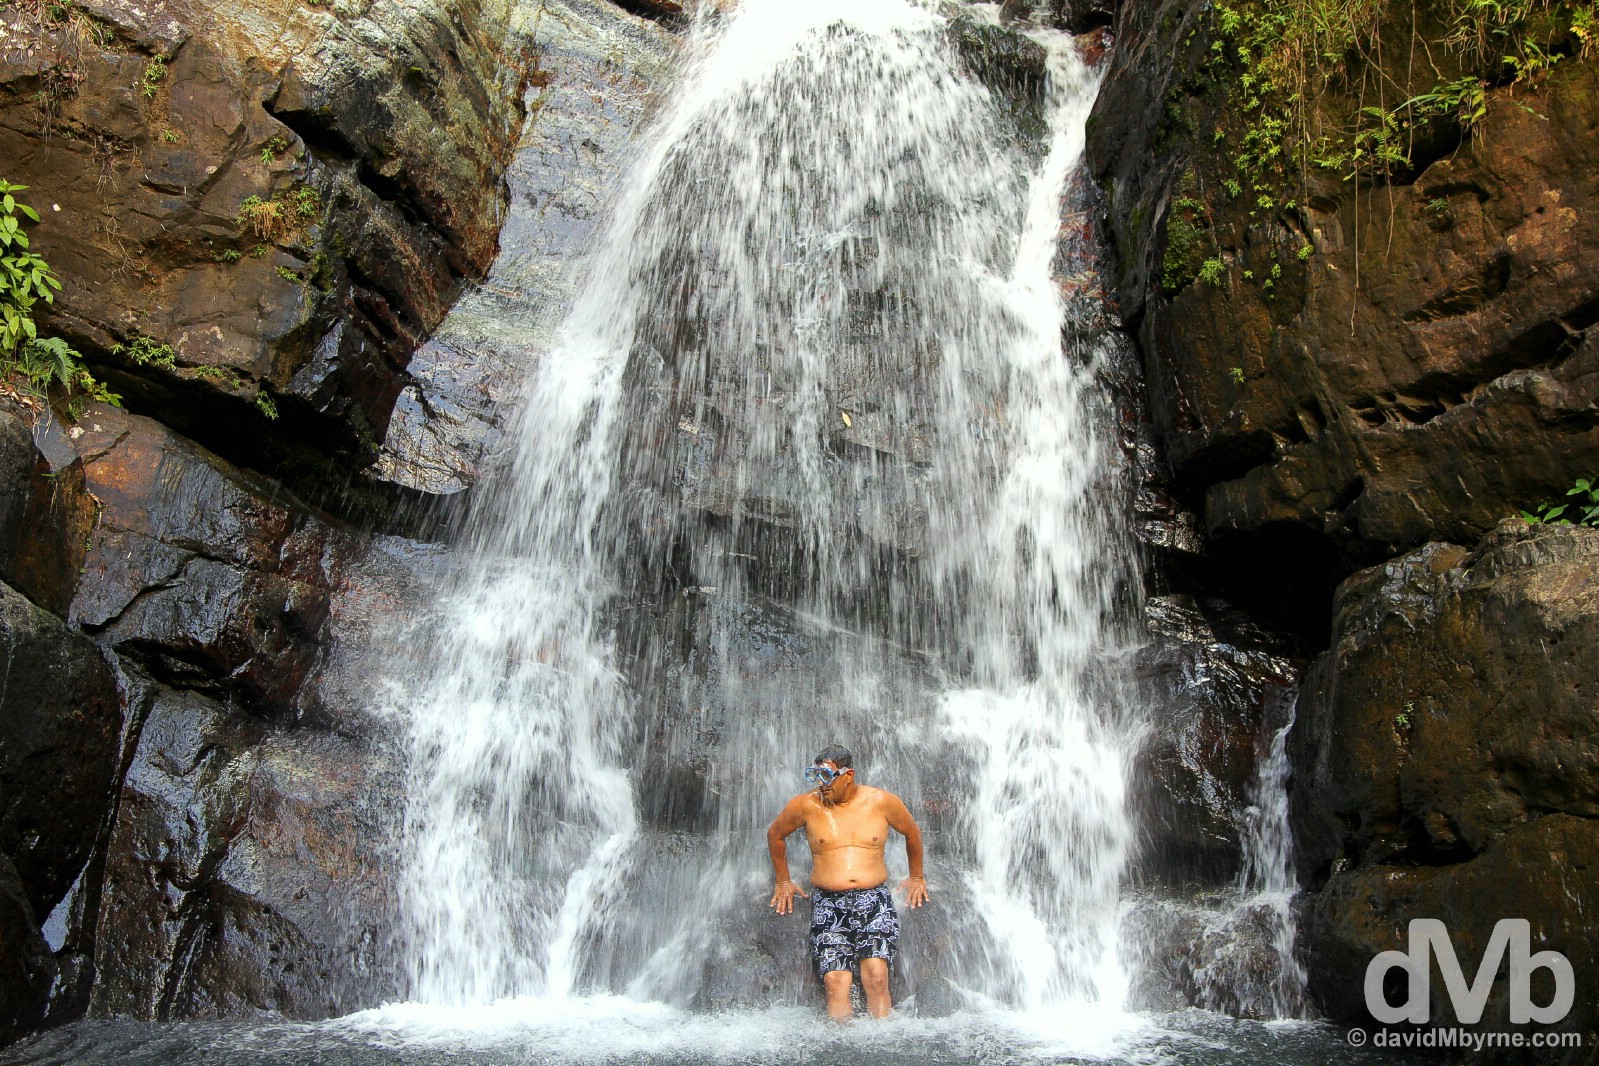 Cooling down in La Mina Falls of El Yunque National Forest, eastern Puerto Rico, Greater Antilles. June 5, 2015.